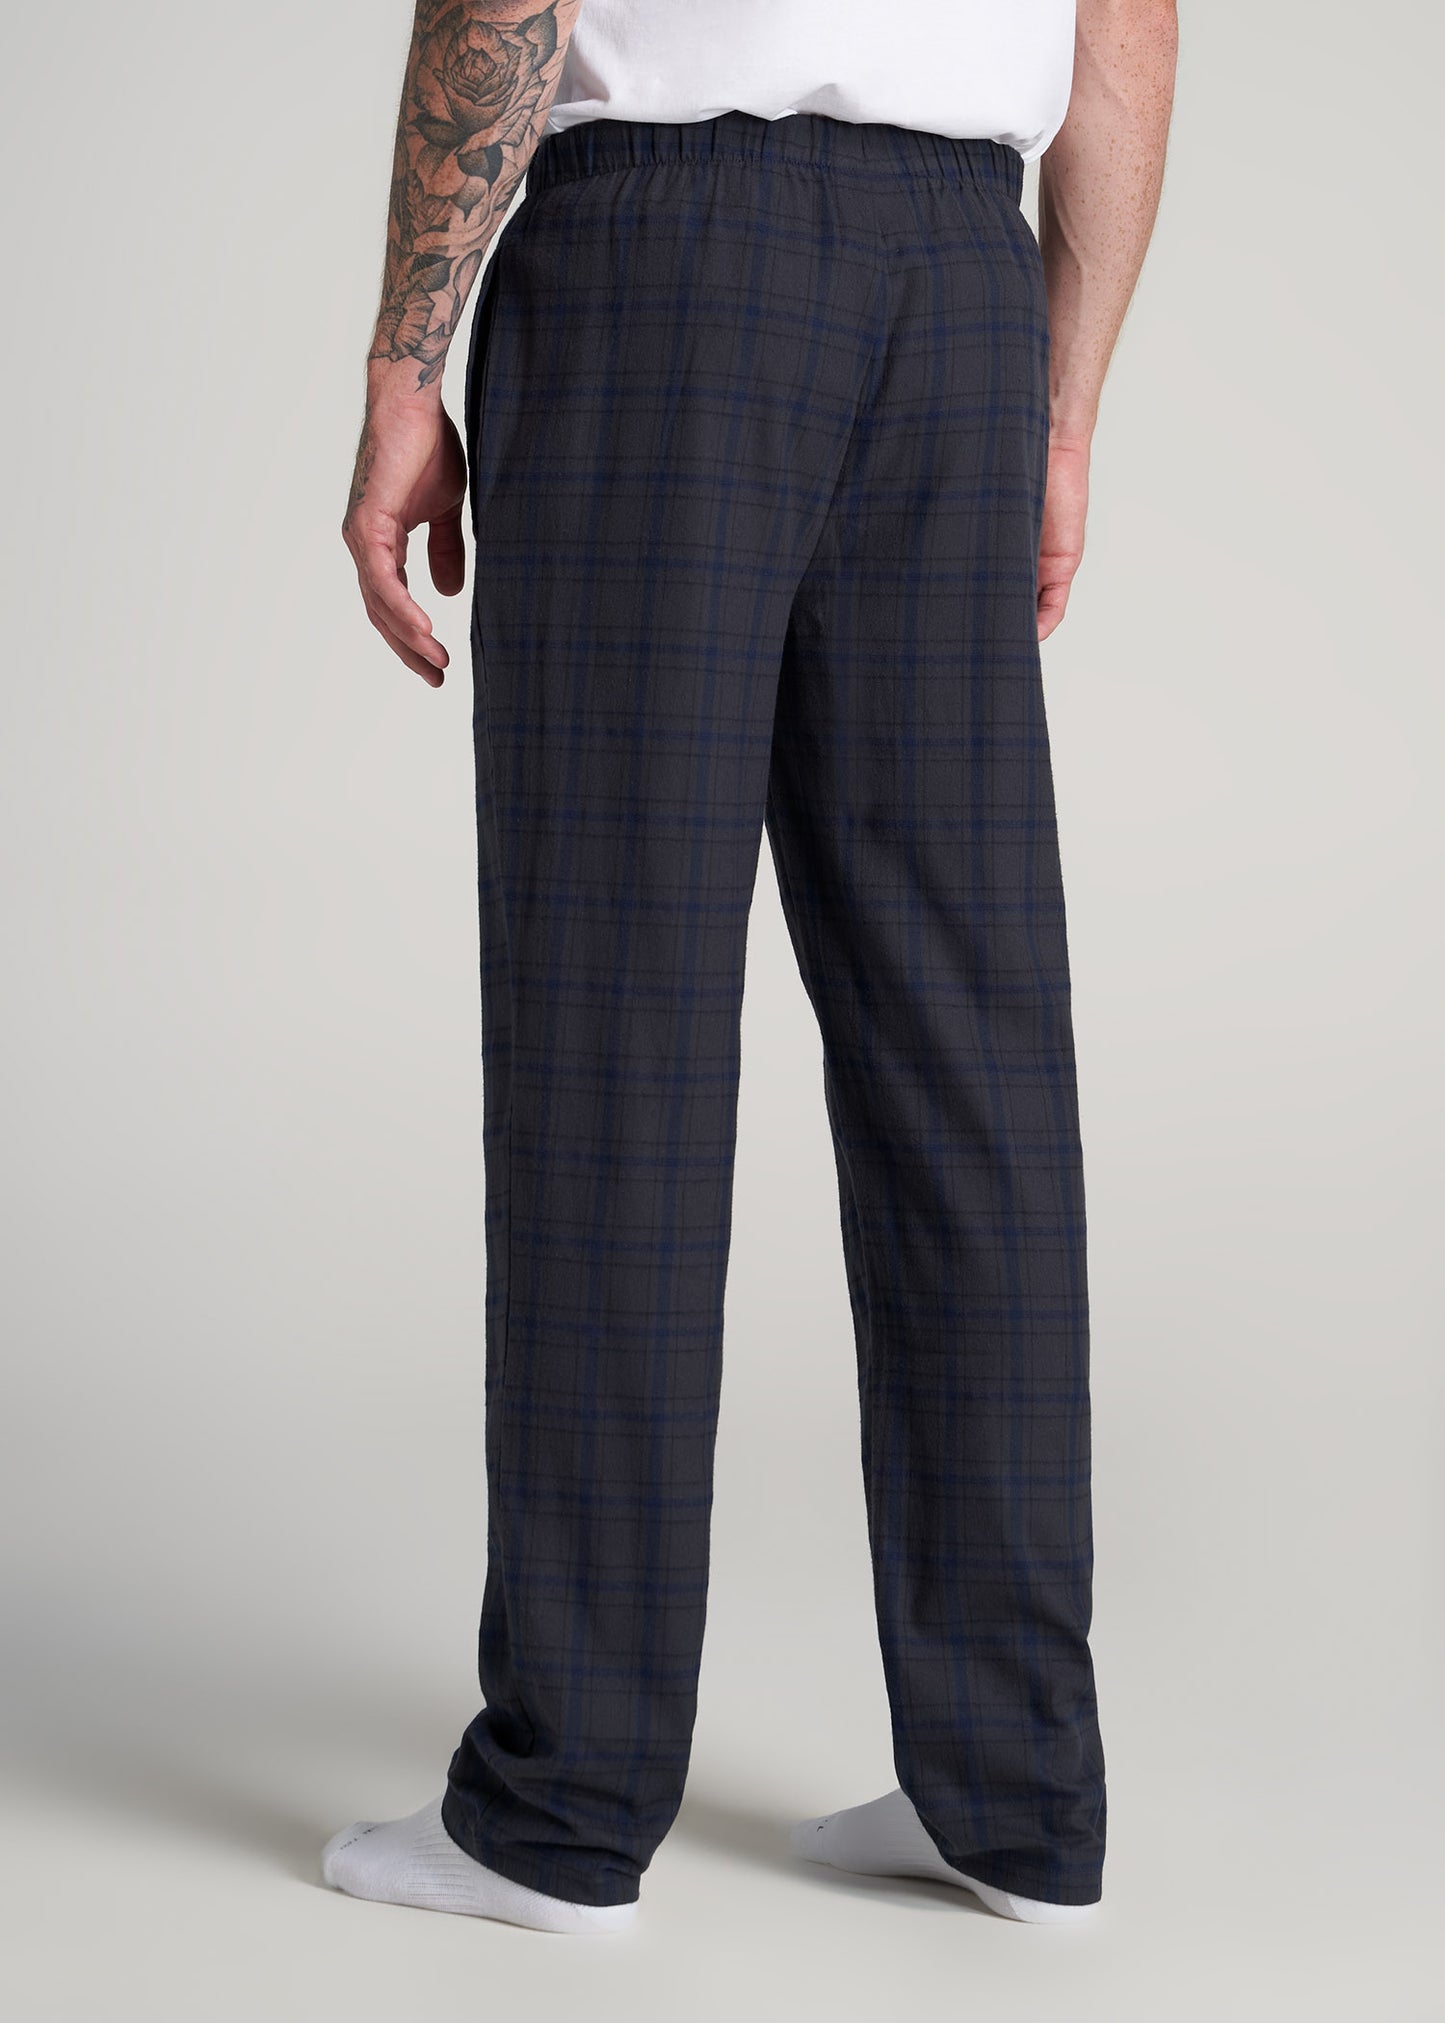       American-Tall-Men-Flannel-Pajamas-Charcoal-Navy-Plaid-back